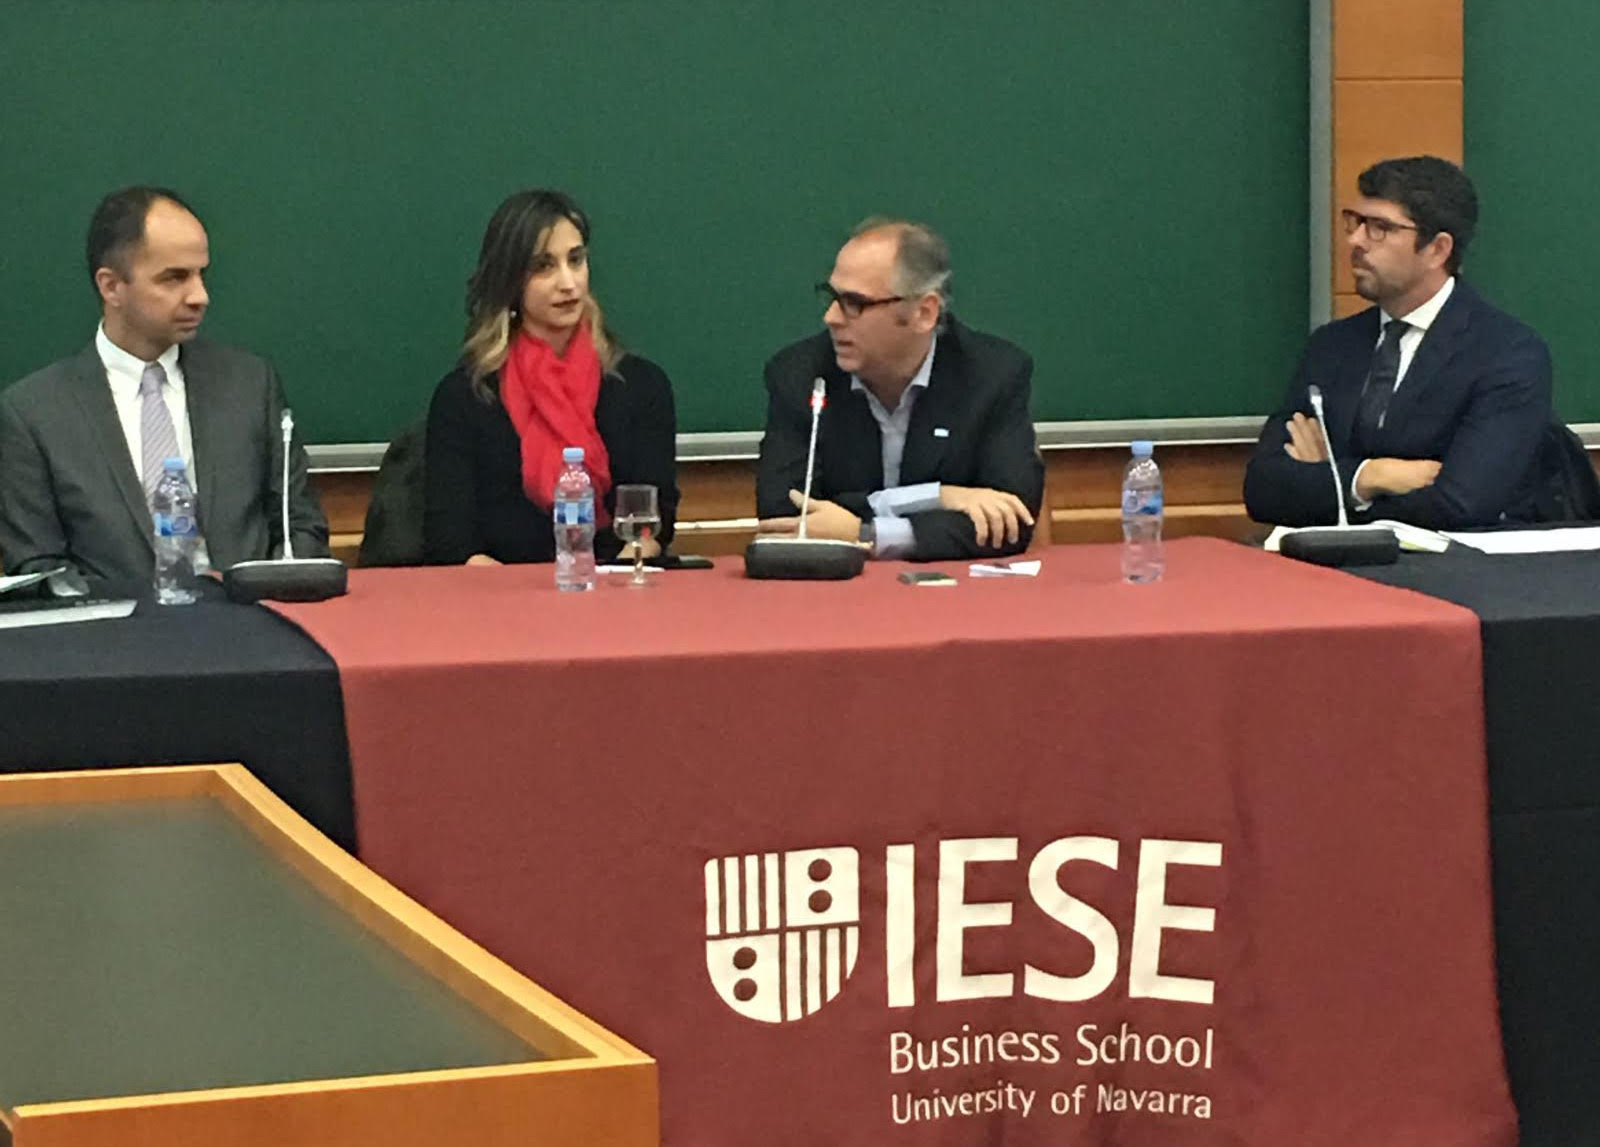 Left to right: Guifré Homedes of Amat Immobiliaris, Constanza Maya of Engel & Völkers, François Carriere of Coldwell Banker, and Alex Vaughan of Lucas Fox, Barcelona estate agents